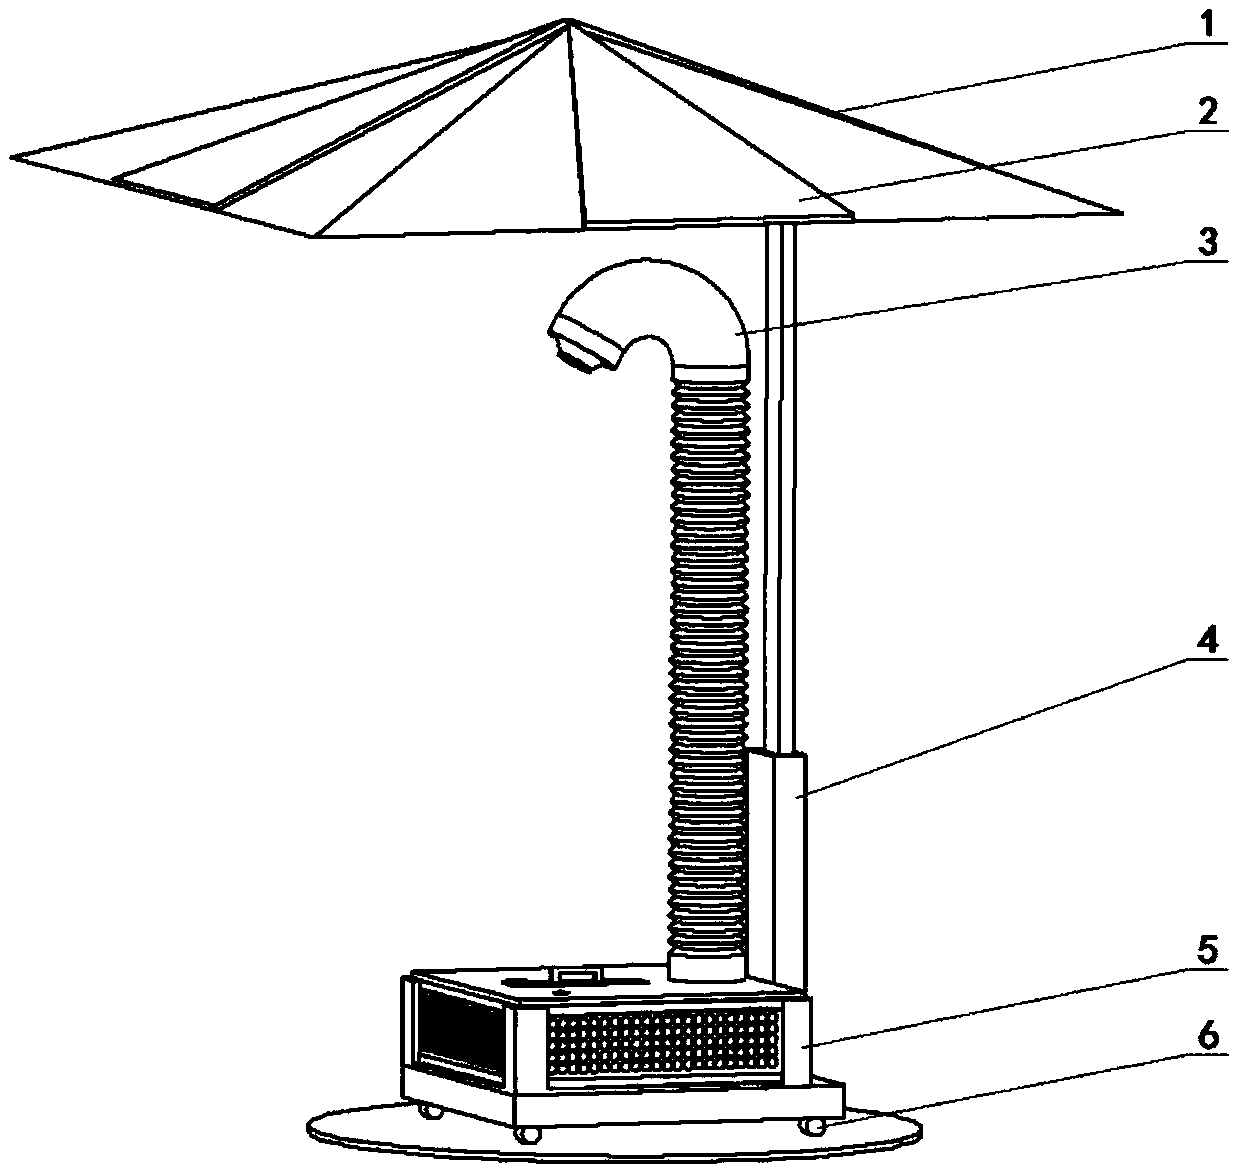 Solar semiconductor air conditioning umbrella based on thermoelectric refrigeration and direct evaporation refrigeration